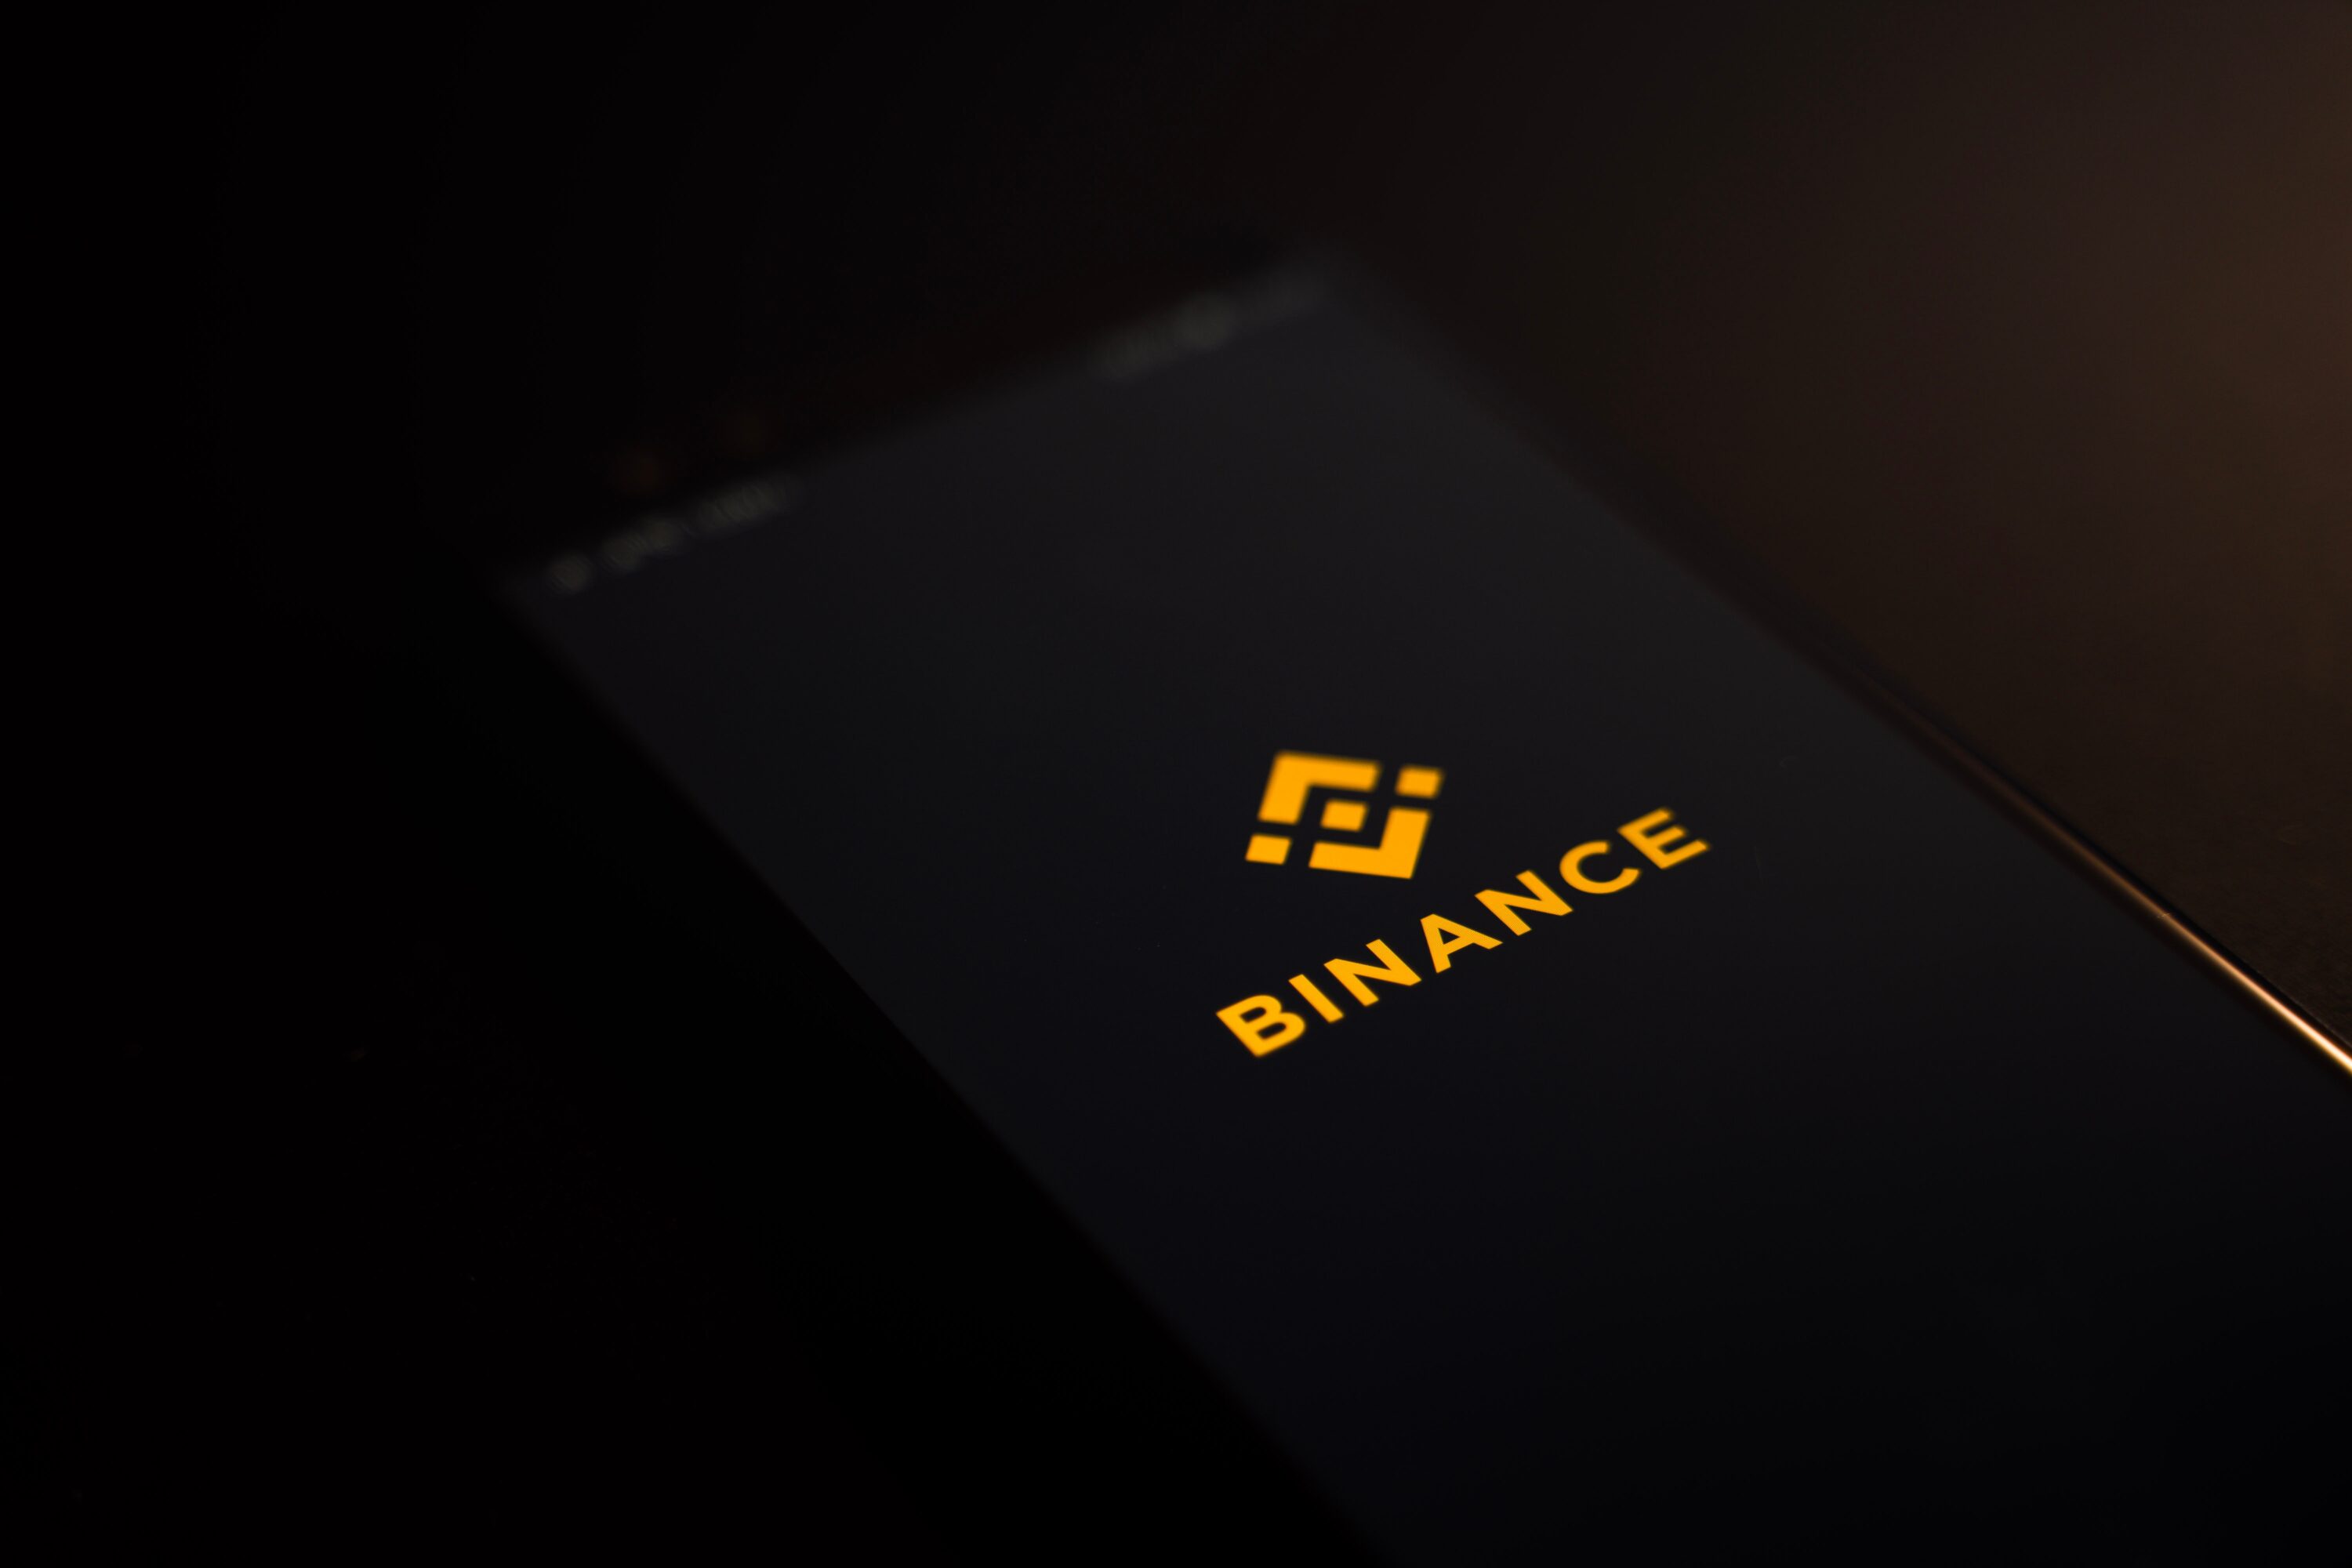 Binance launches Web3 wallet for DeFi interaction